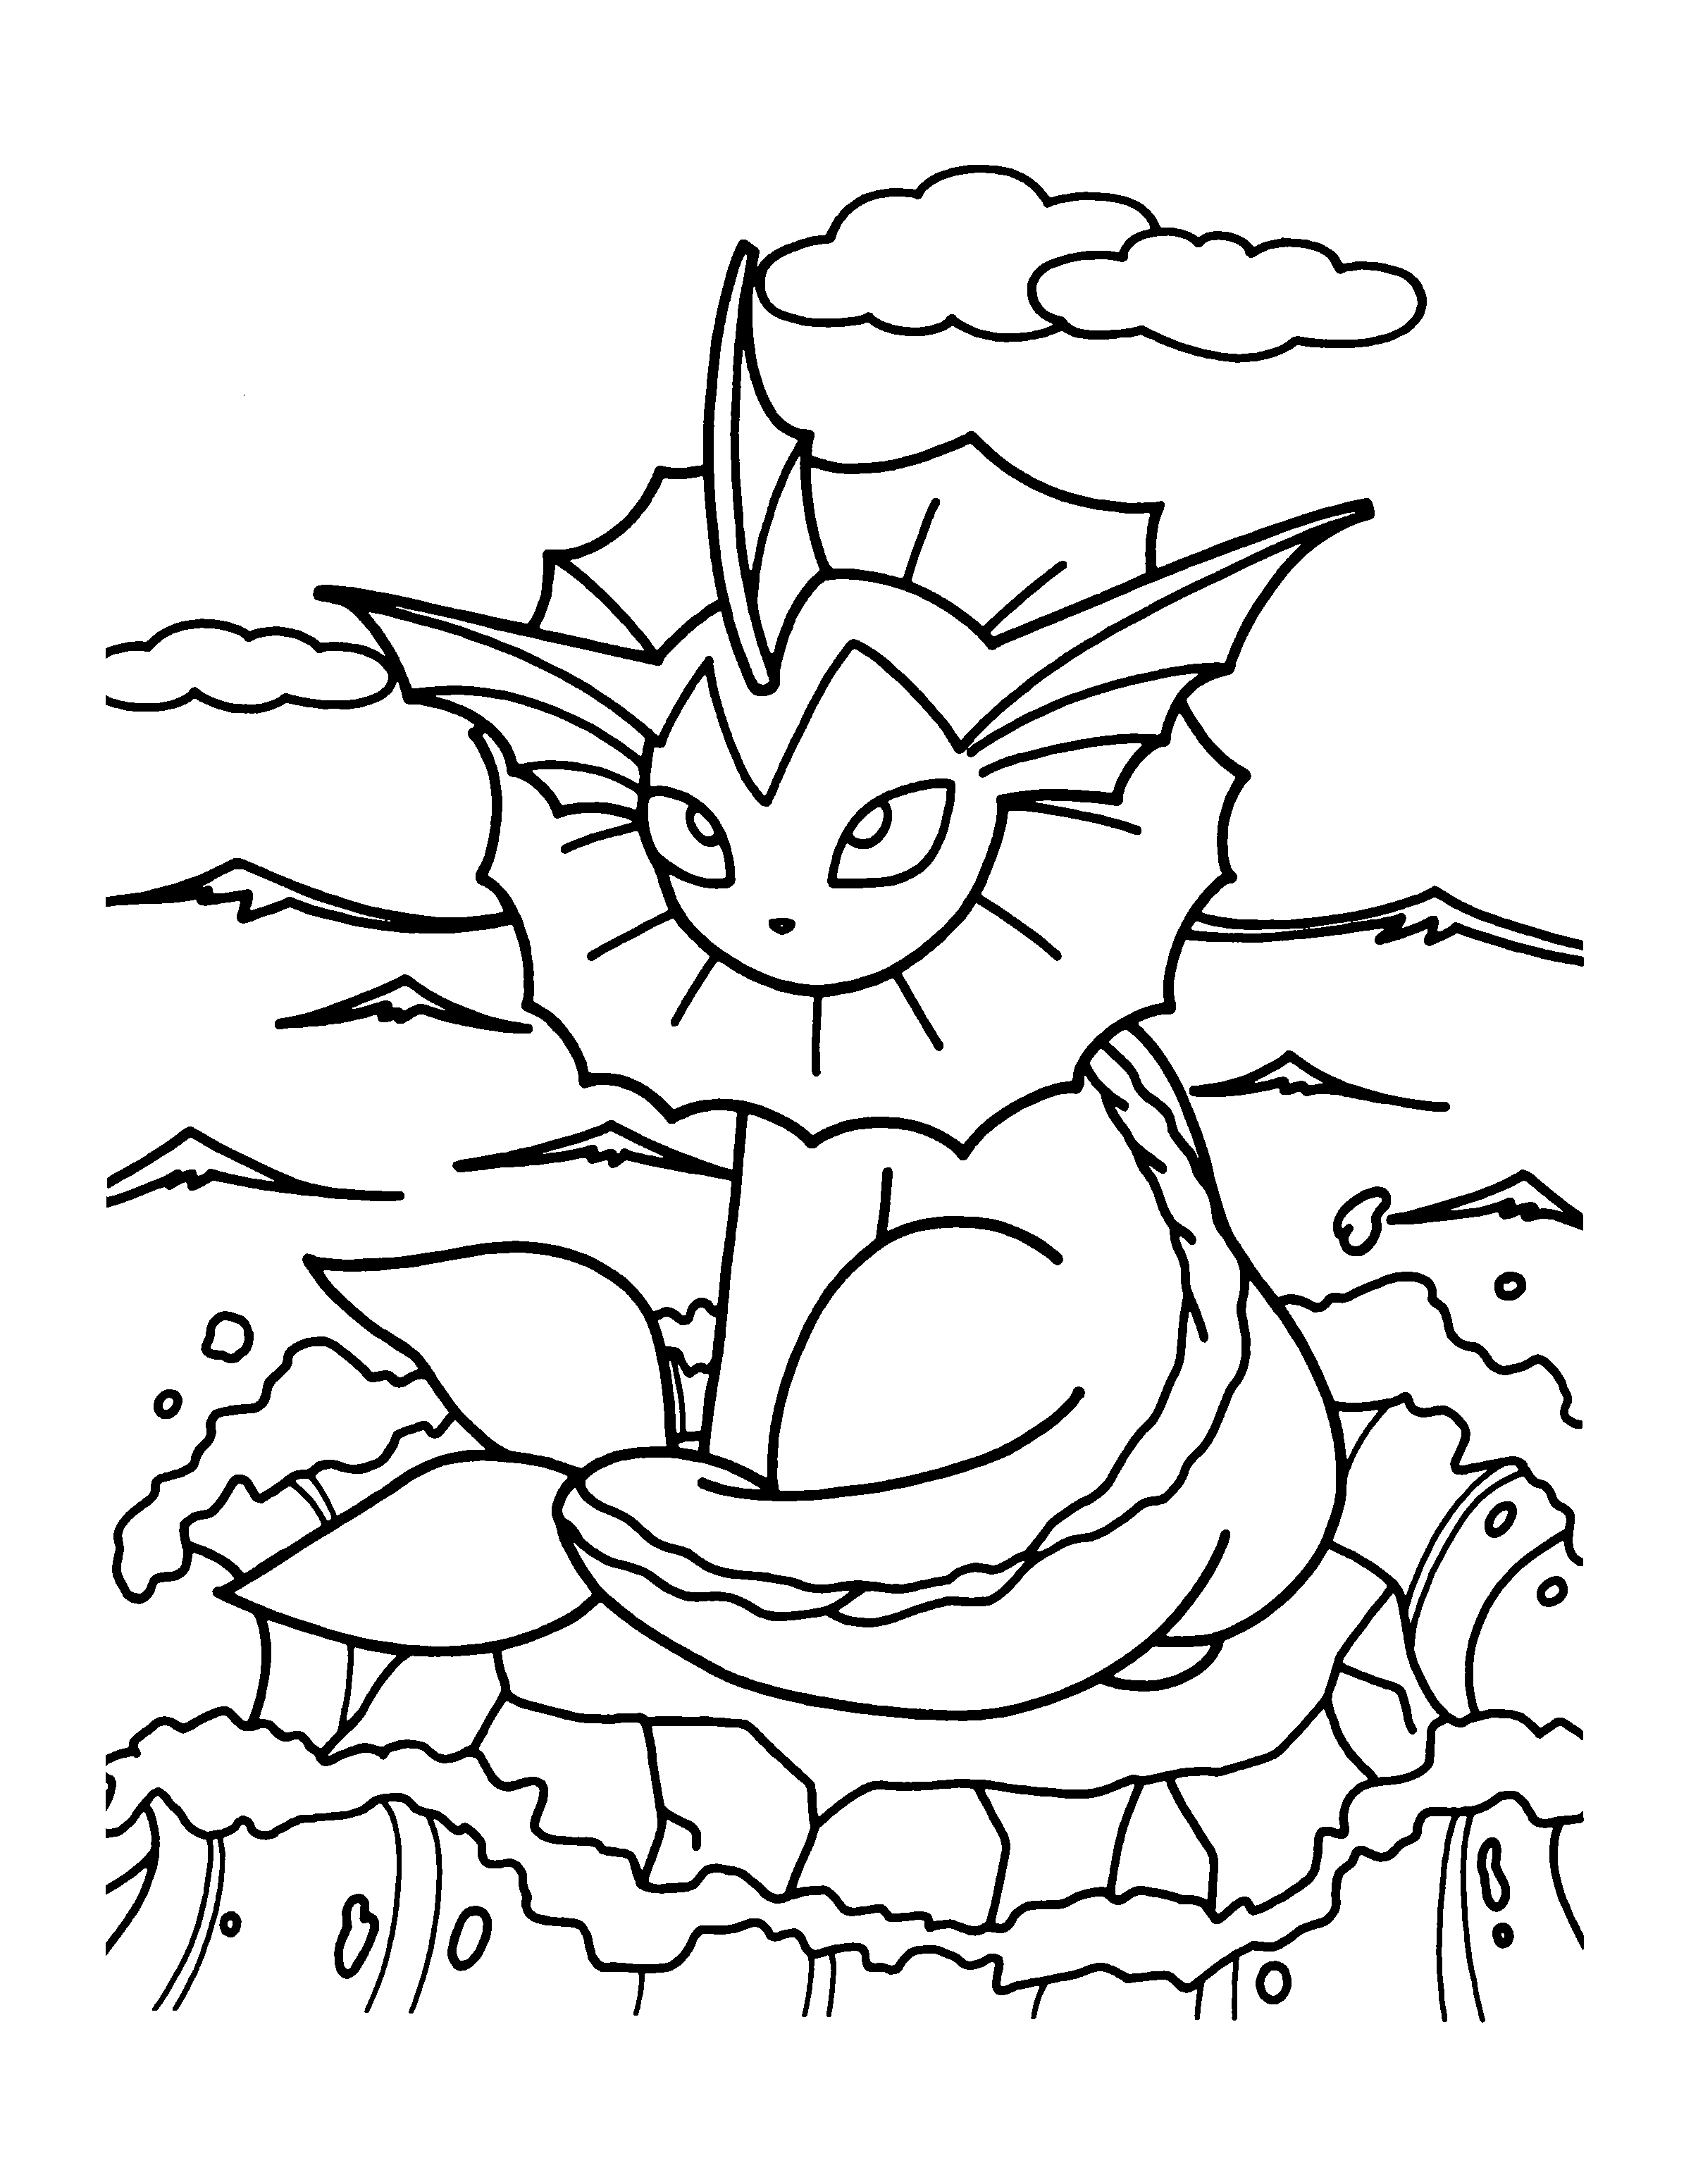 animated-coloring-pages-pokemon-image-0650